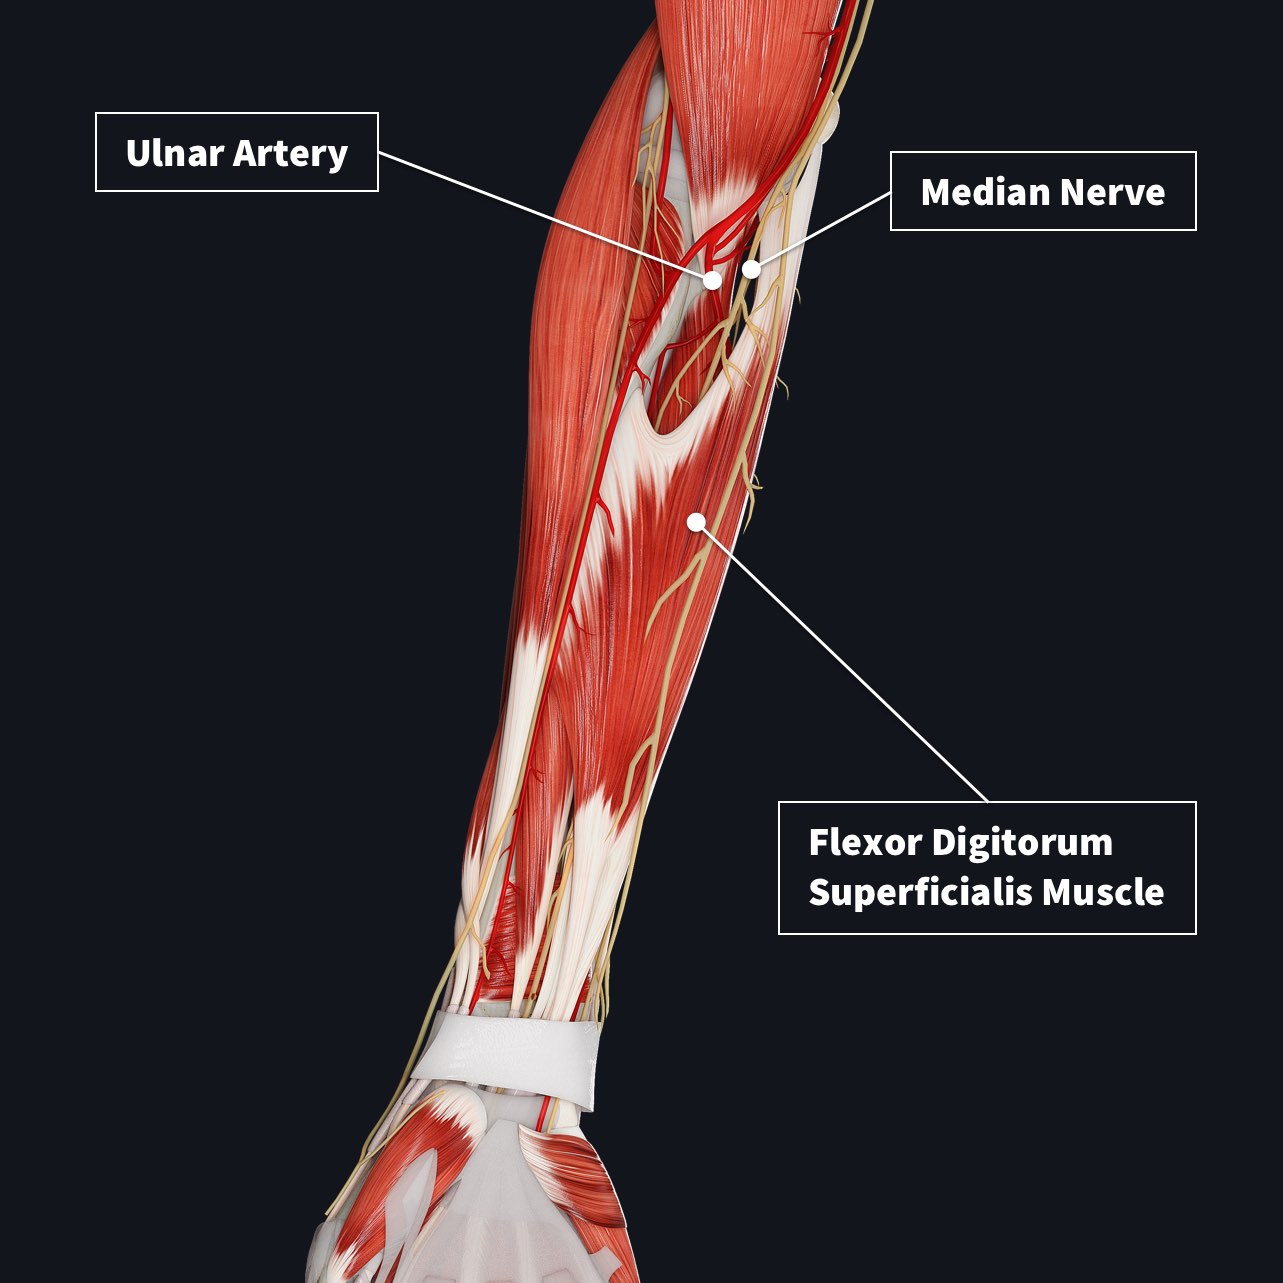 The anterior compartment of the forearm showing the Flexor Digitorum Superficialis Muscle of the intermediate group